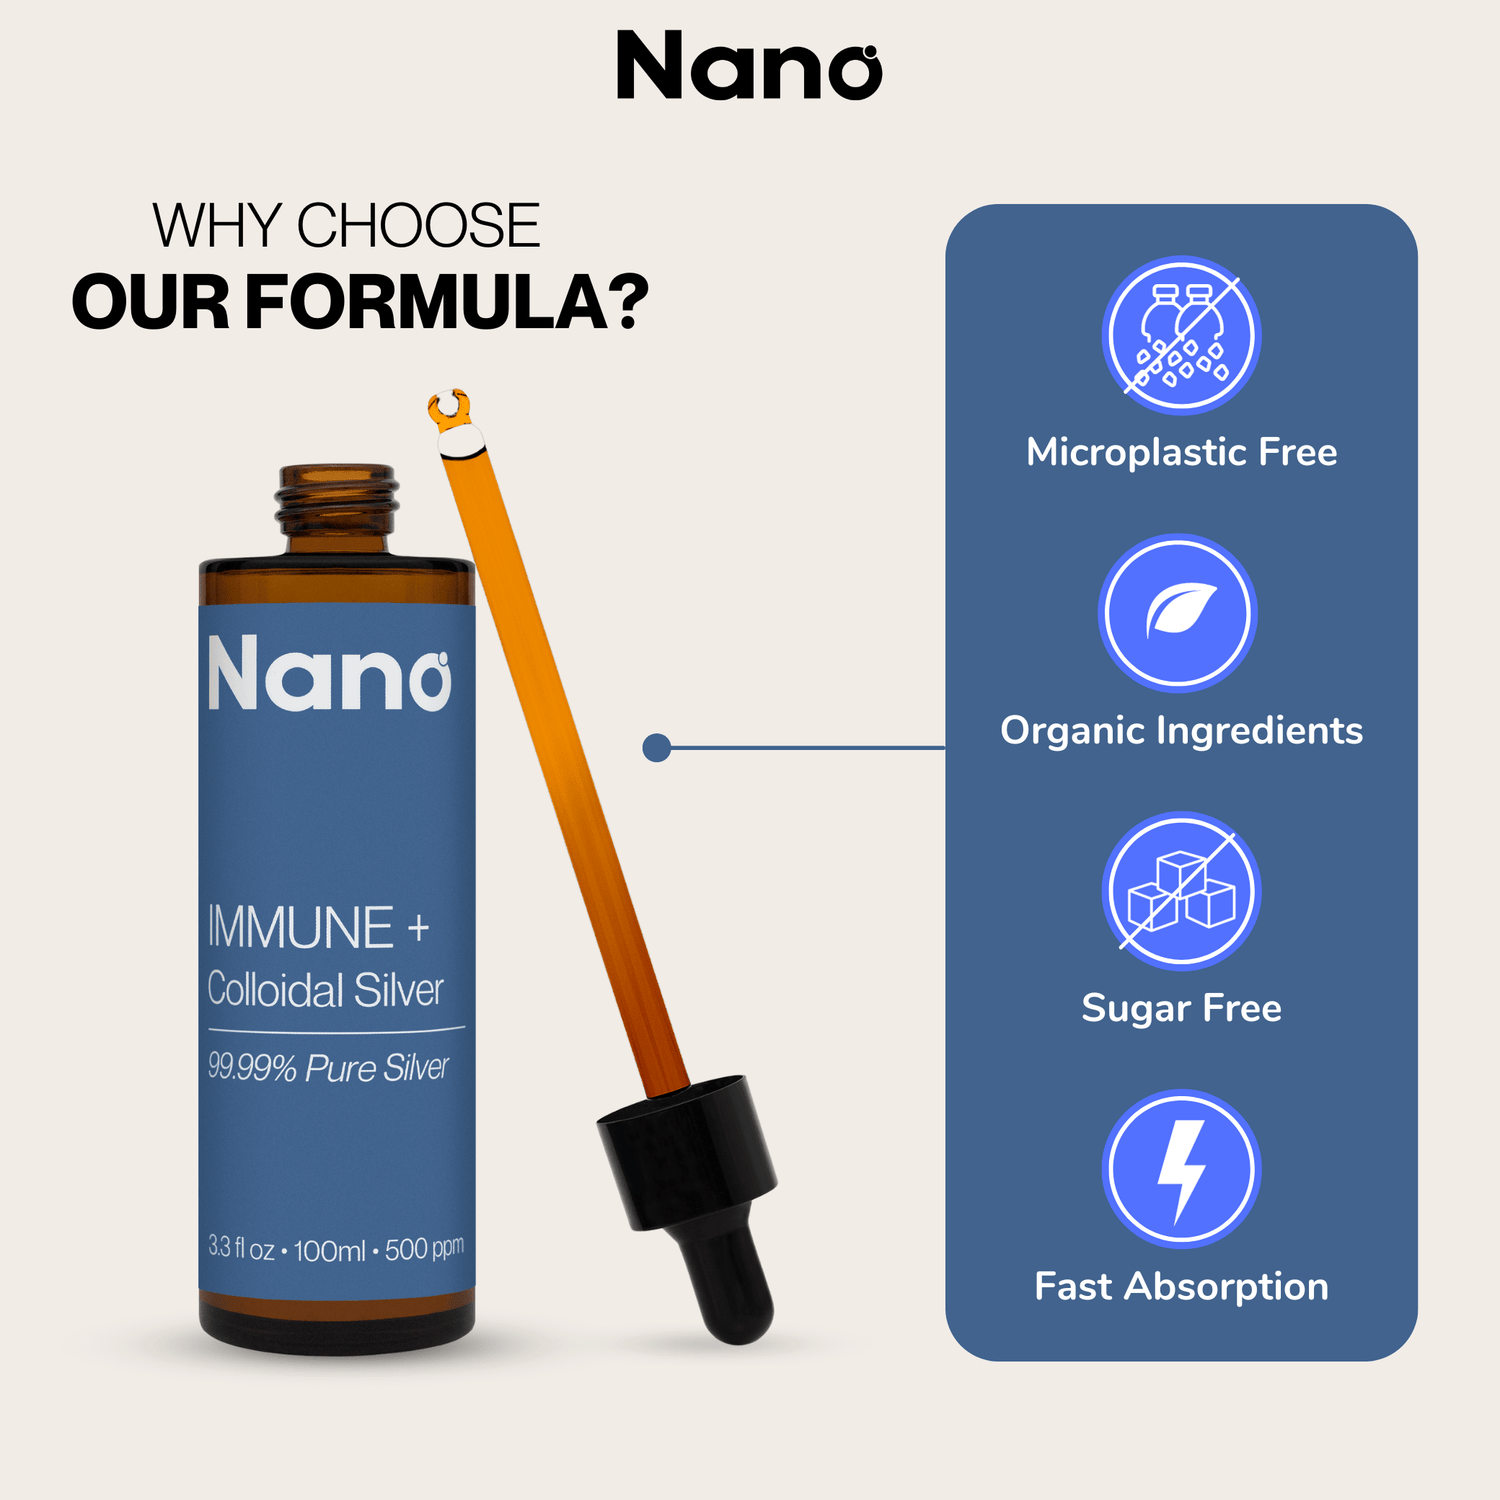 Nano 500 ppm Immune plus colloidal silver is micro plastic free, organic, sugar free, and highly bioavailable